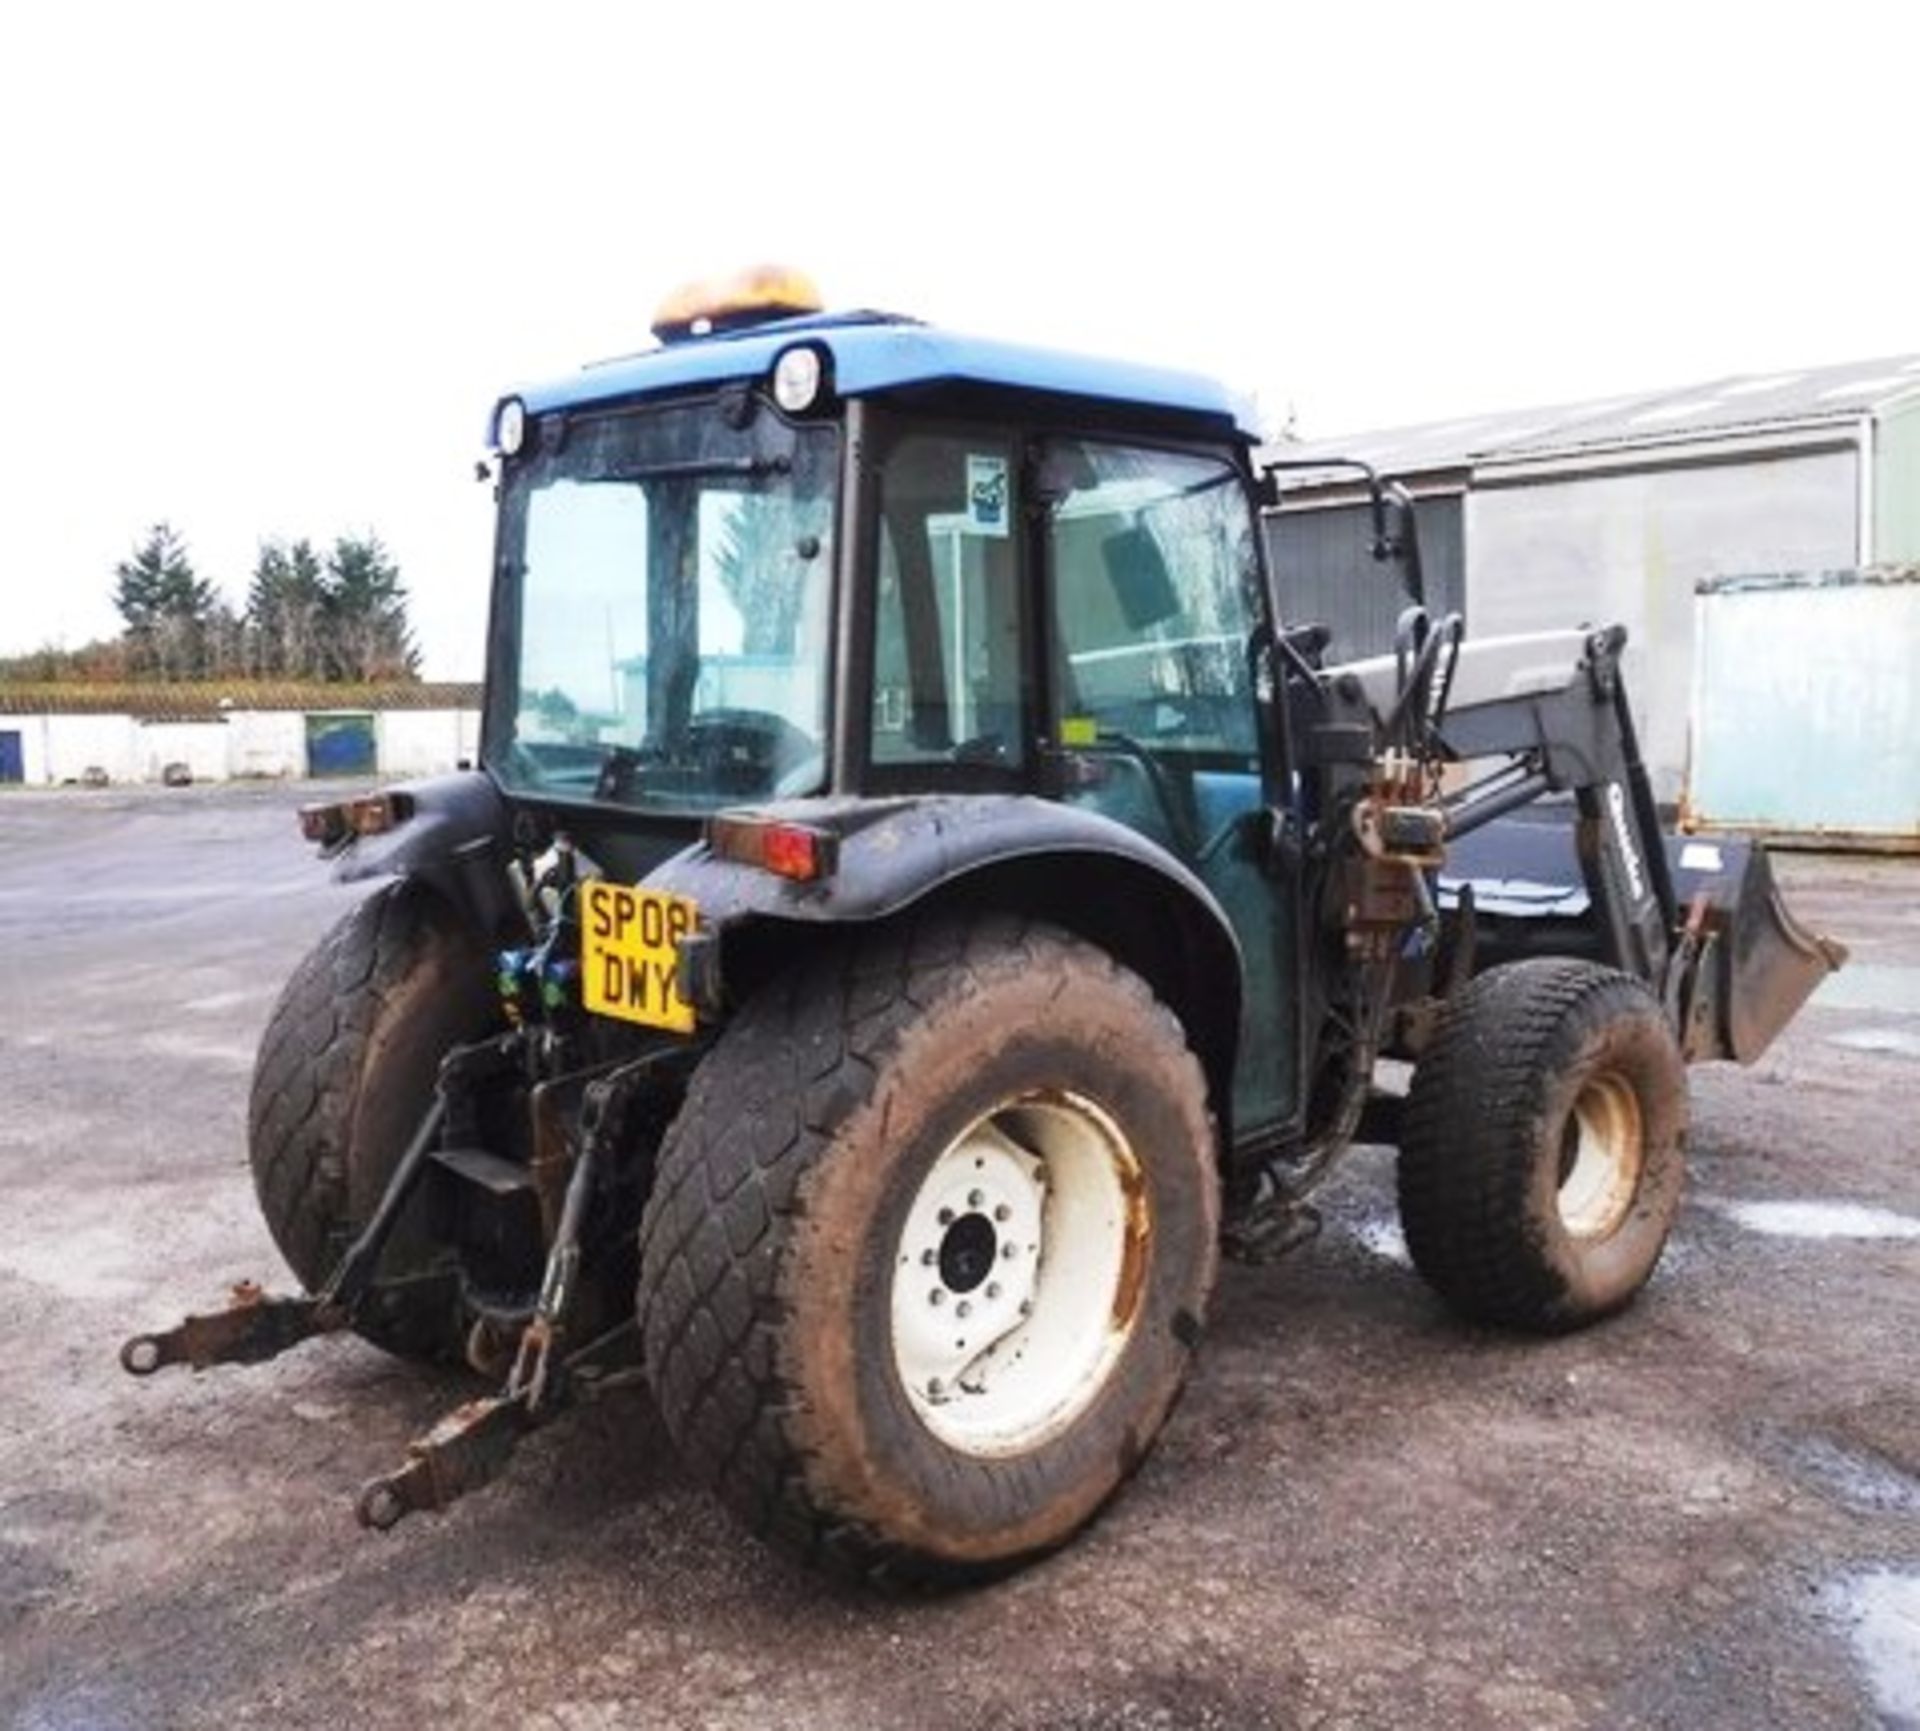 2008 NEW HOLLAND TN60 TRACTOR. REG NO SP08 DWY. SN 111054. GVW(TONNES) 4497, 3062HRS (NOT VERIFIED) - Image 2 of 40